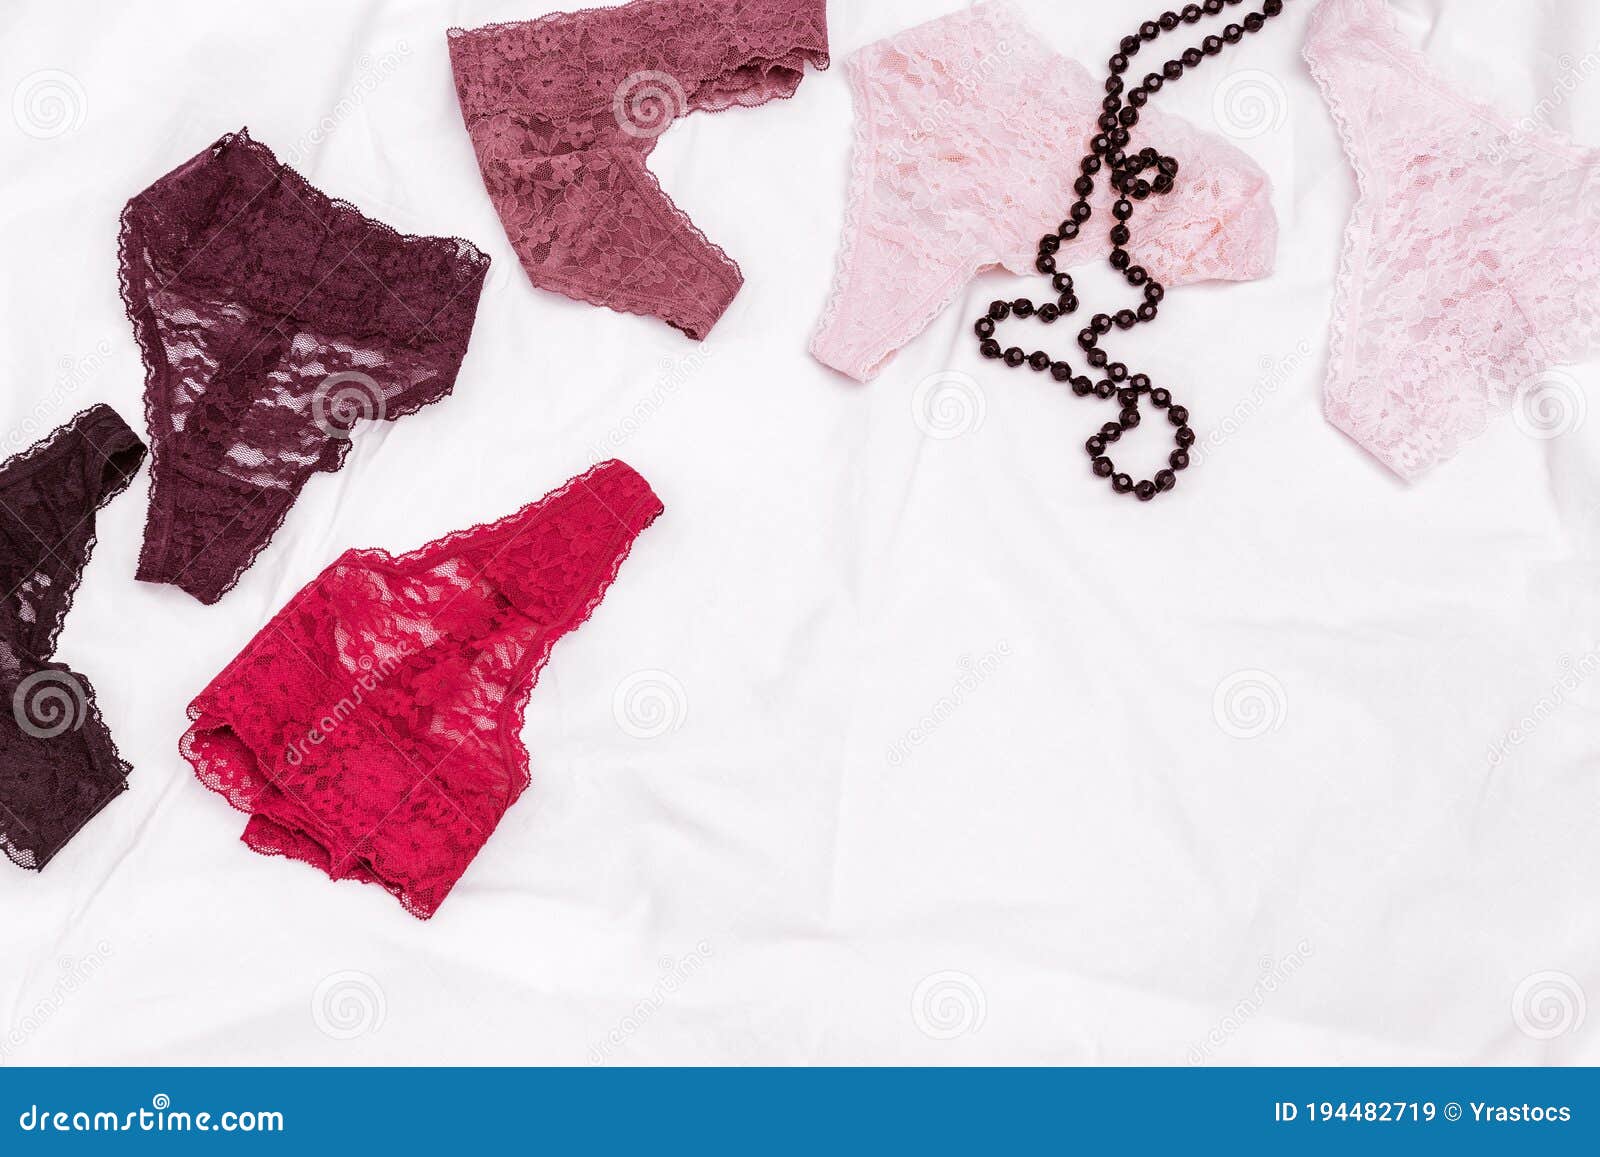 Women`s Lingerie on White Bed Sheet. Many Different Lace Bikini Panties and  Black Beads Stock Image - Image of desire, flatlay: 194482719